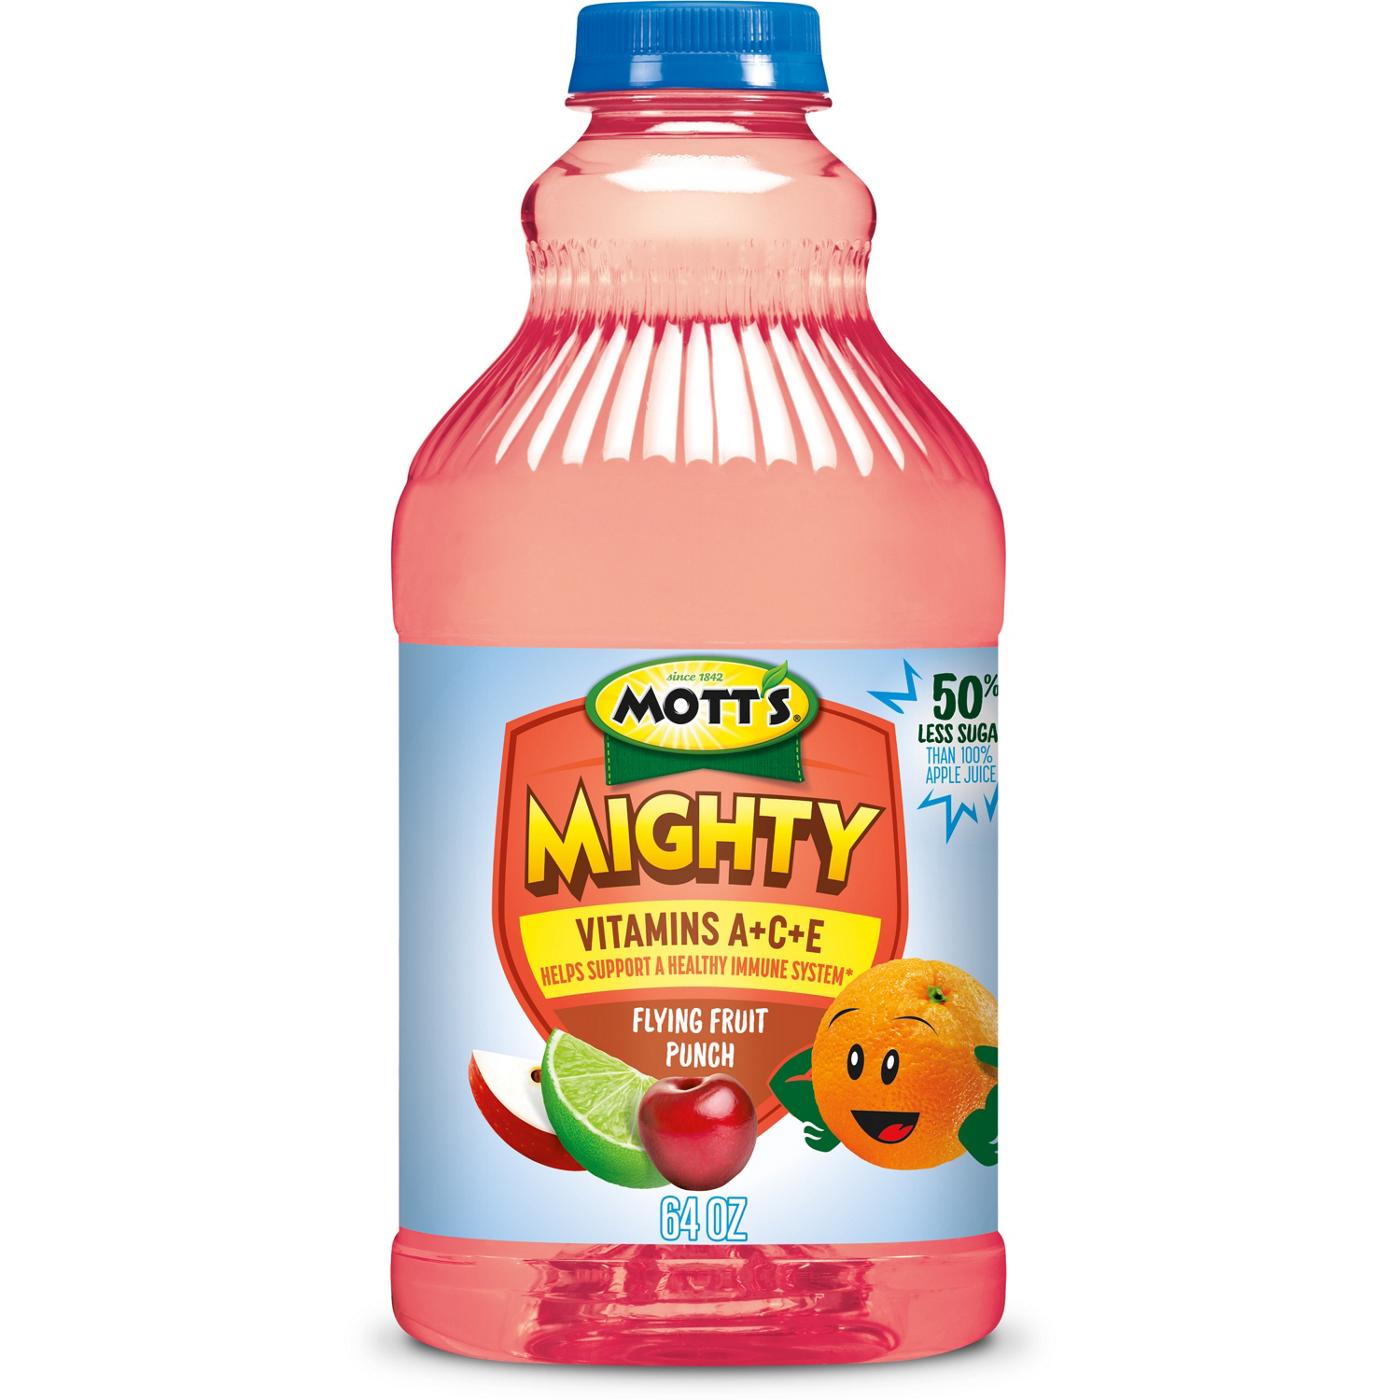 Mott's Mighty Flying Fruit Punch Juice; image 2 of 5